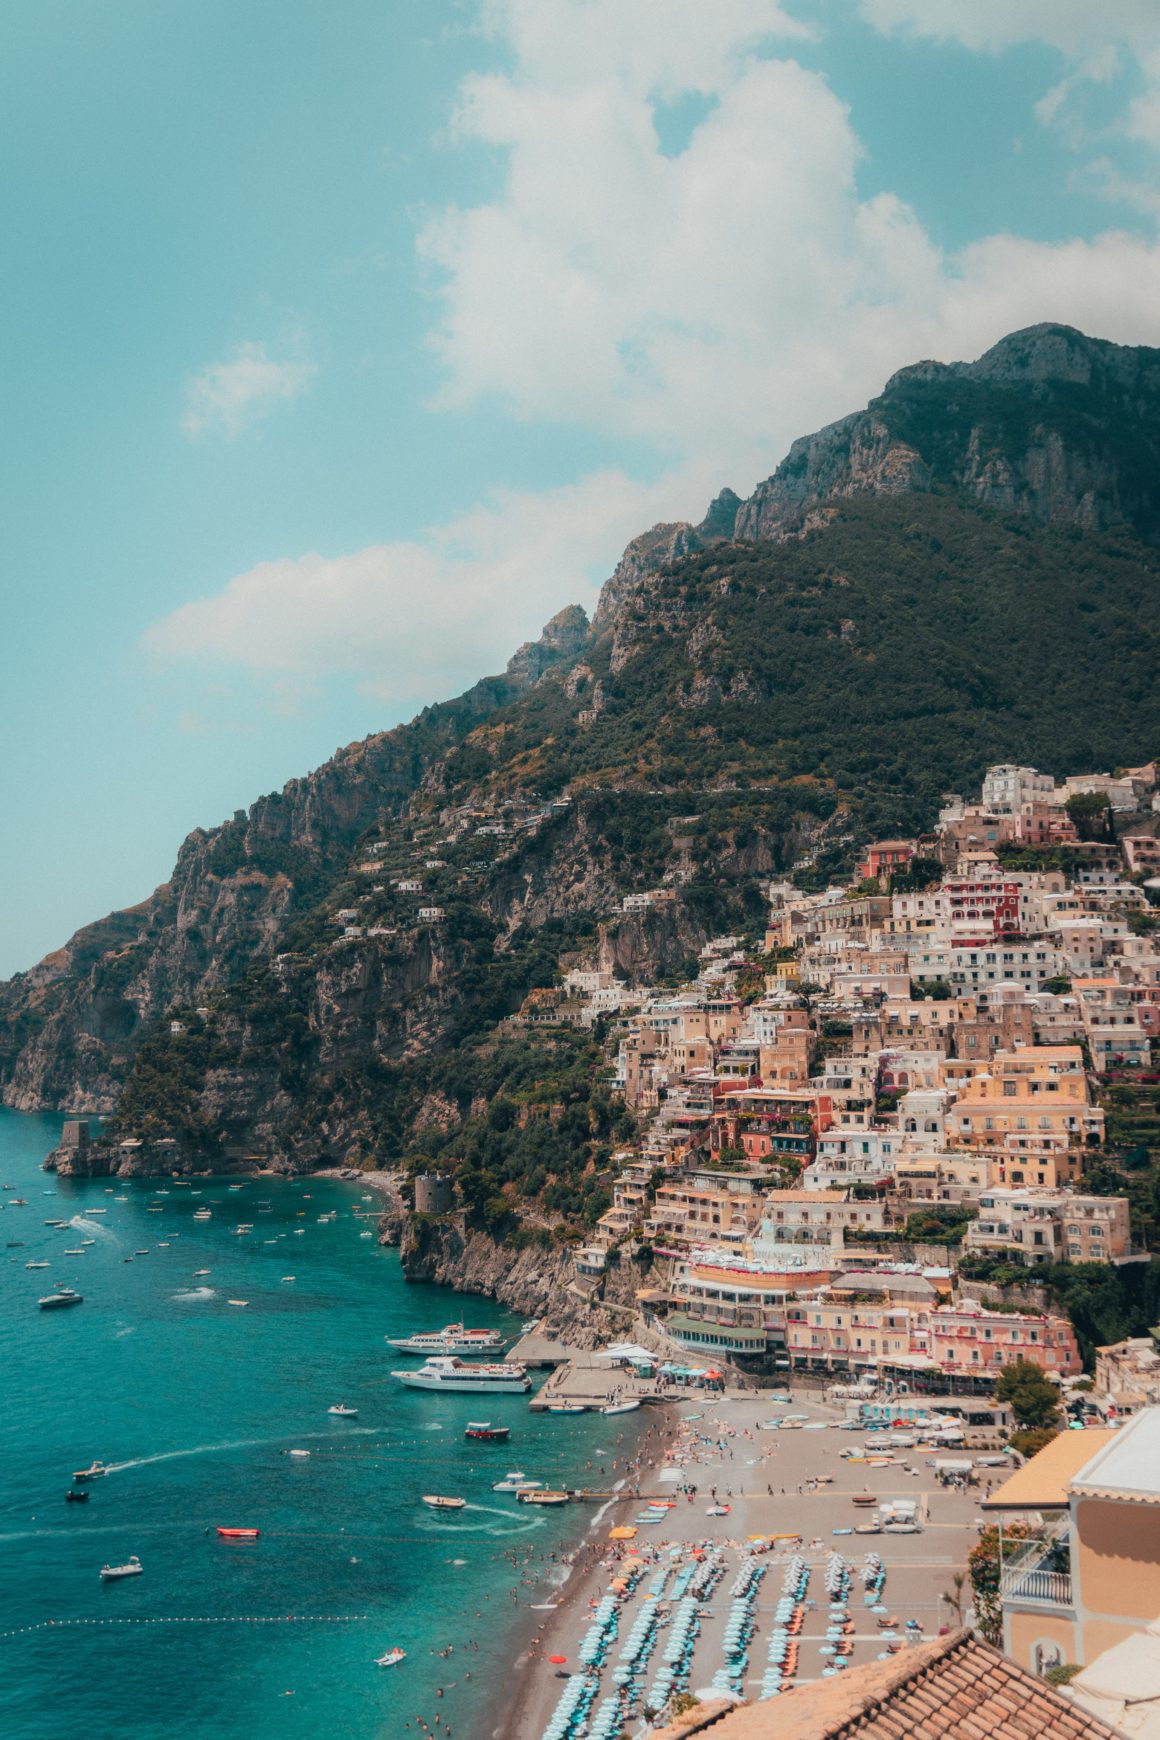 Yachts off of a beach with a backdrop of the hillside houses of Positano, Italy